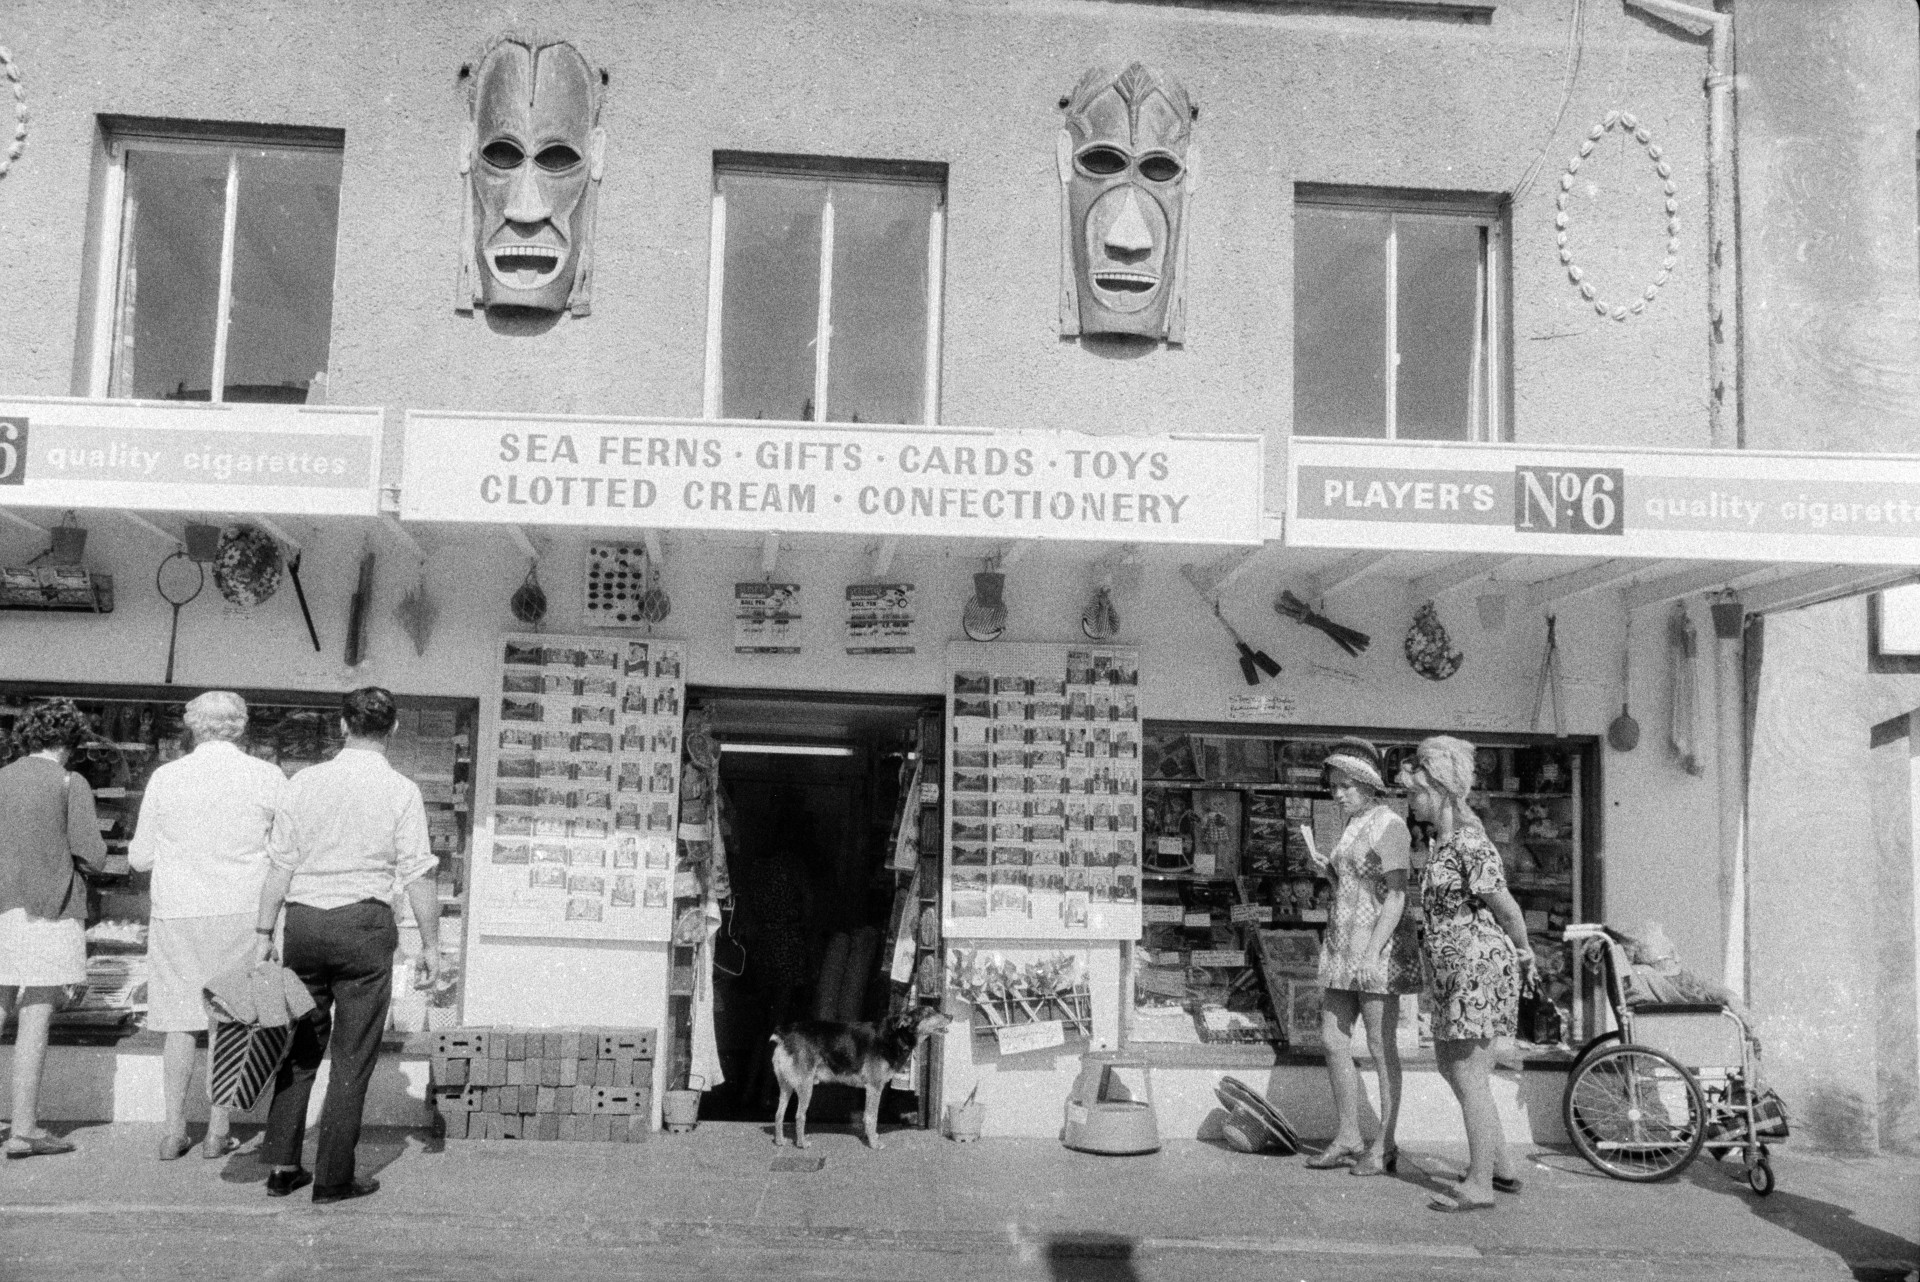 Men and women looking at a gift shop on the seafront at Ilfracombe. Postcards are on display, a dog is stood in the doorway and a woman is sat in a wheelchair outside. An advert for Players No.10 cigarettes is above the shopfront; and a shell pattern and carved wooden masks decorate the shop front.